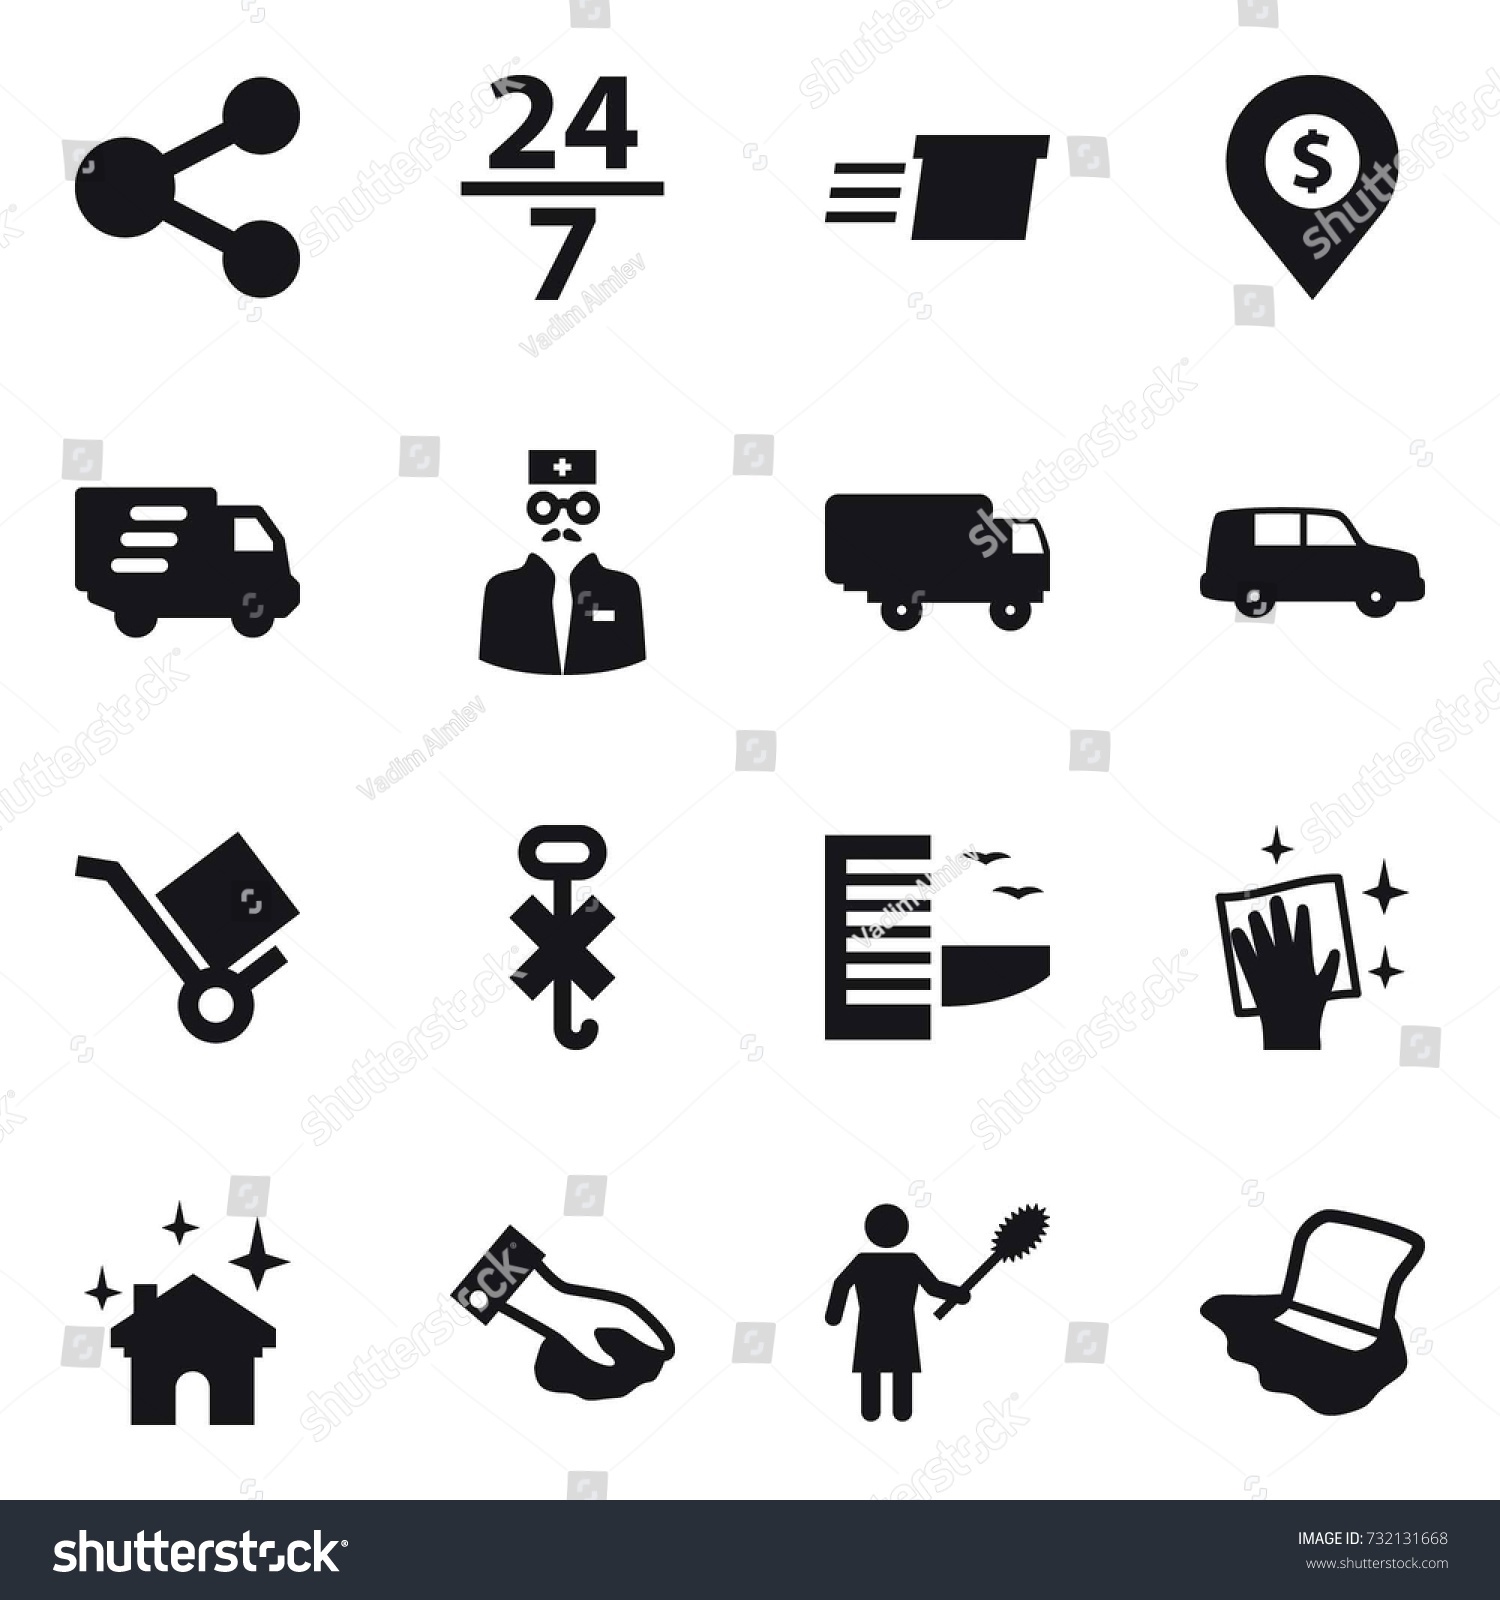 16 vector icon set : share, 24/7, delivery, dollar pin, hotel, wiping, house cleaning, woman with pipidaster, floor washing #732131668